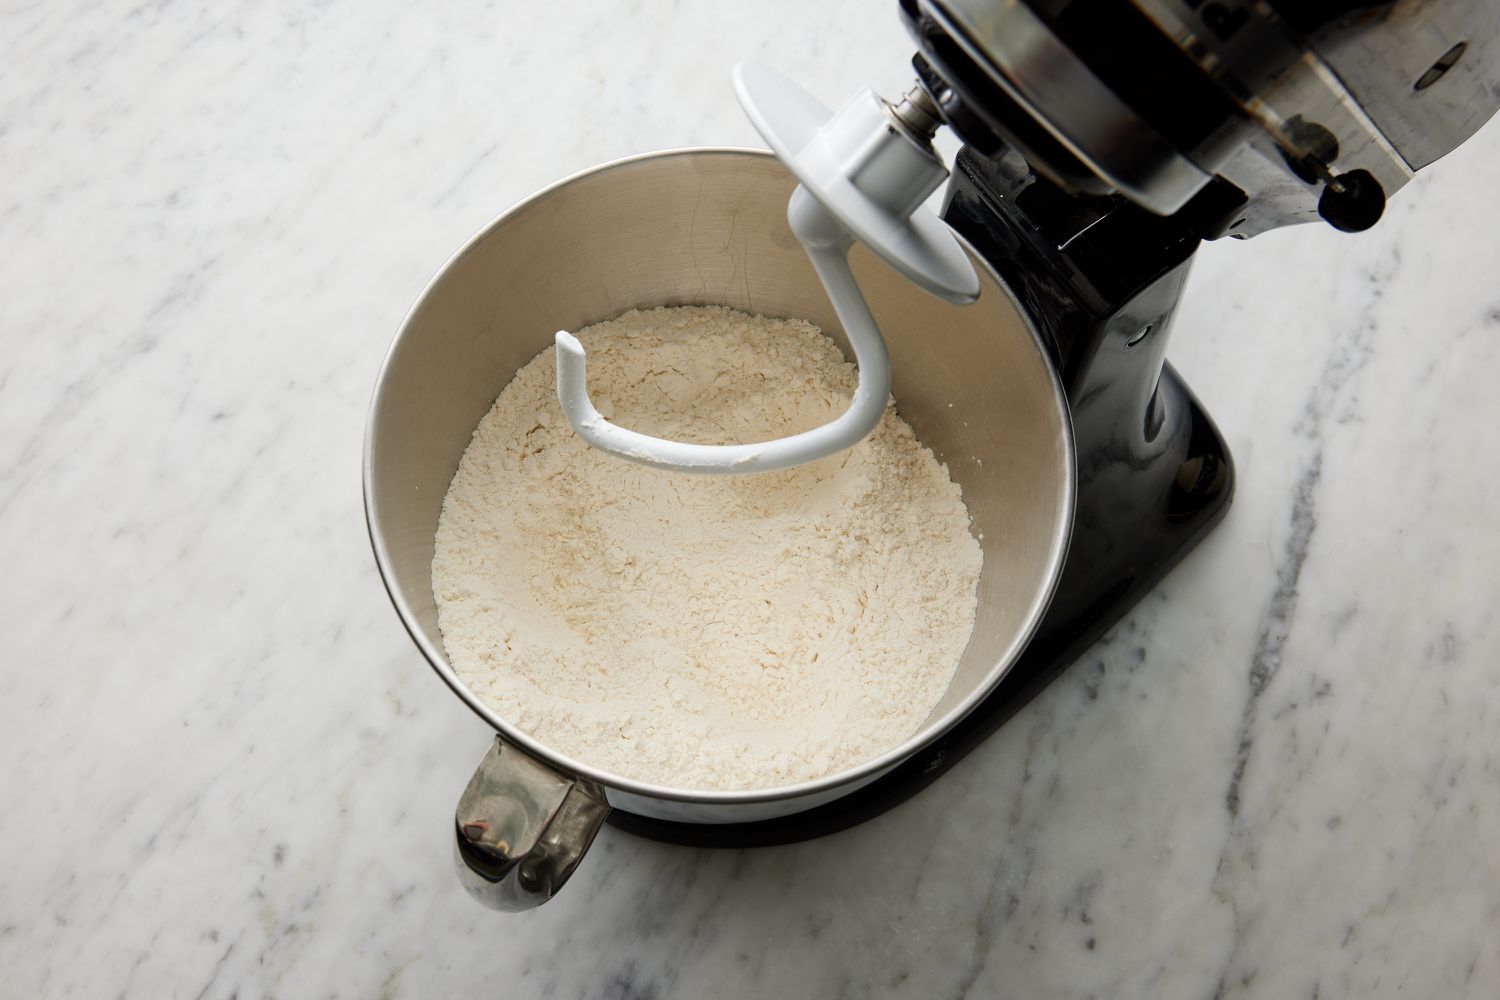 dry ingredients in bowl of stand mixer